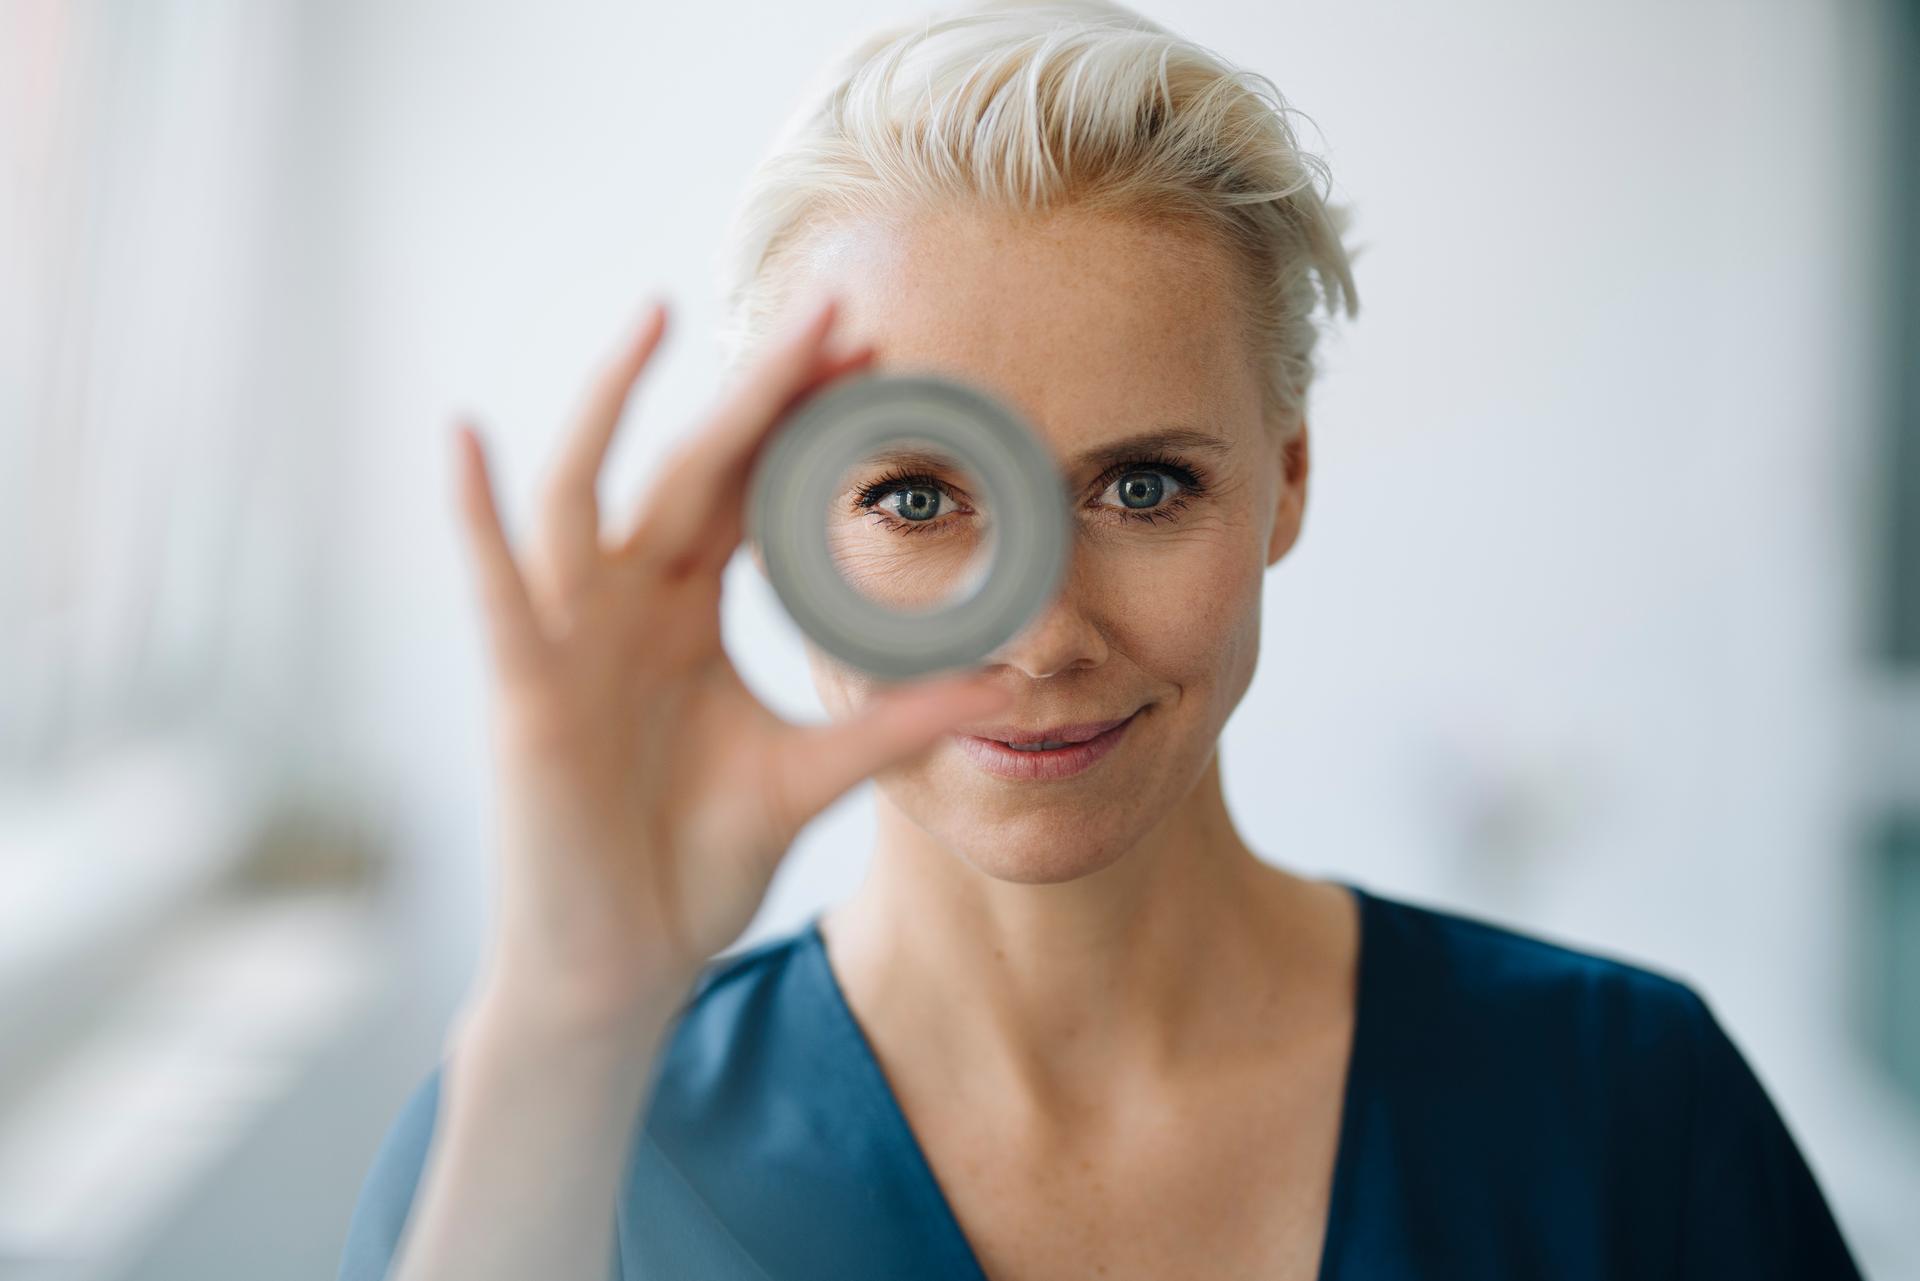 A woman holding a circular object in front of her face.